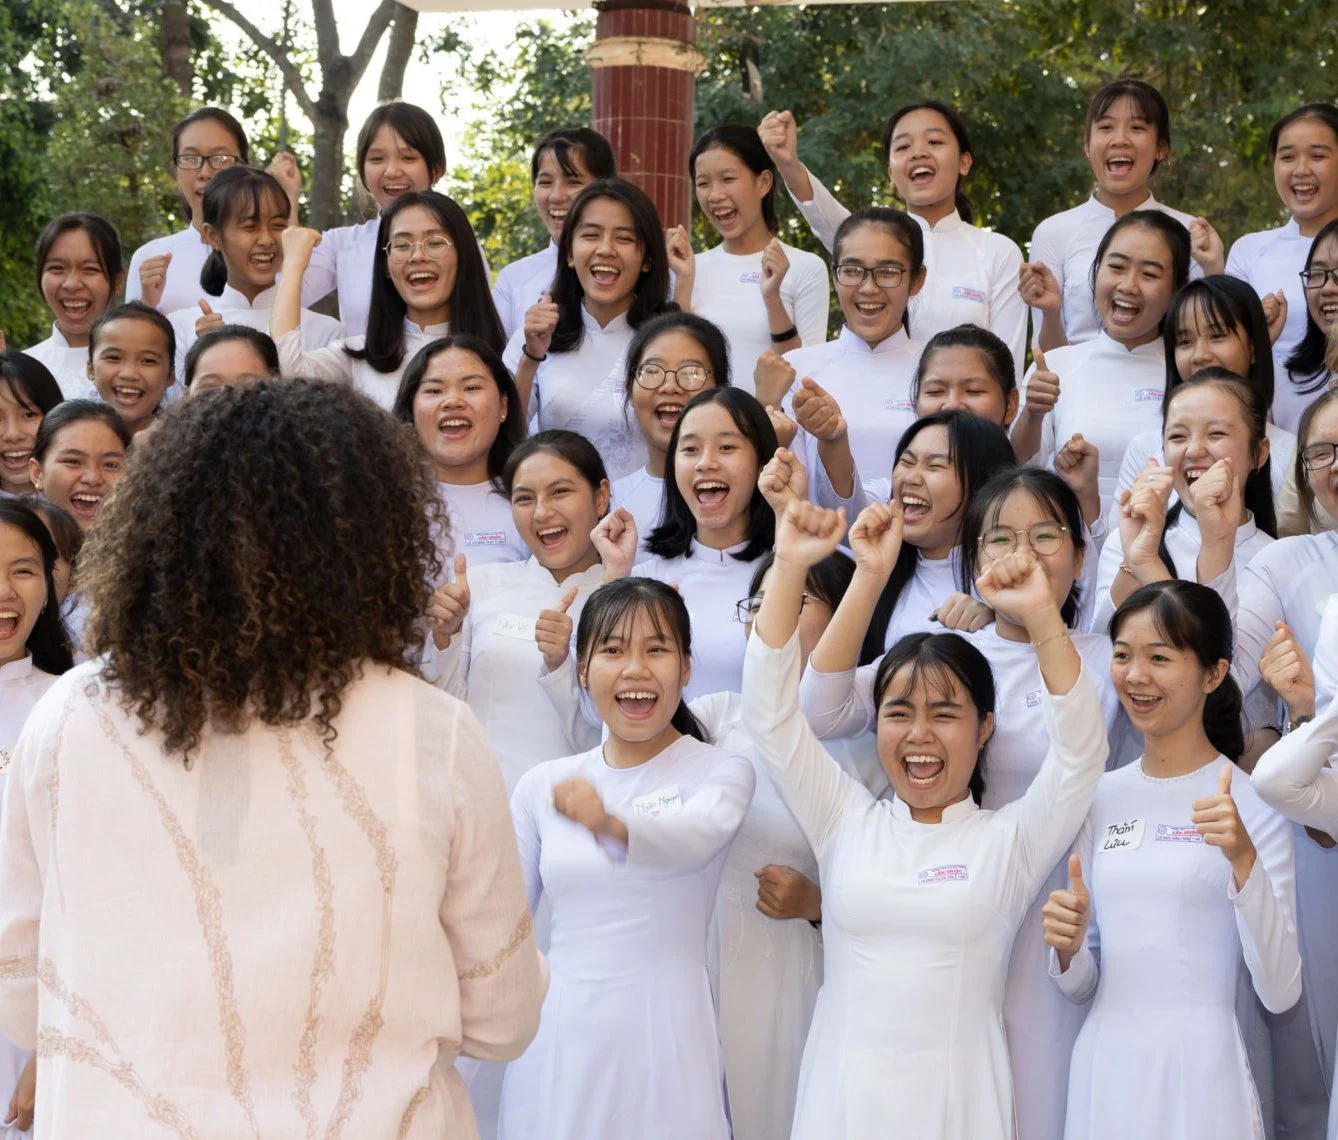 Mrs. Obama faces a group of excited young girls wearing white robes with their hands above their heads in joy.